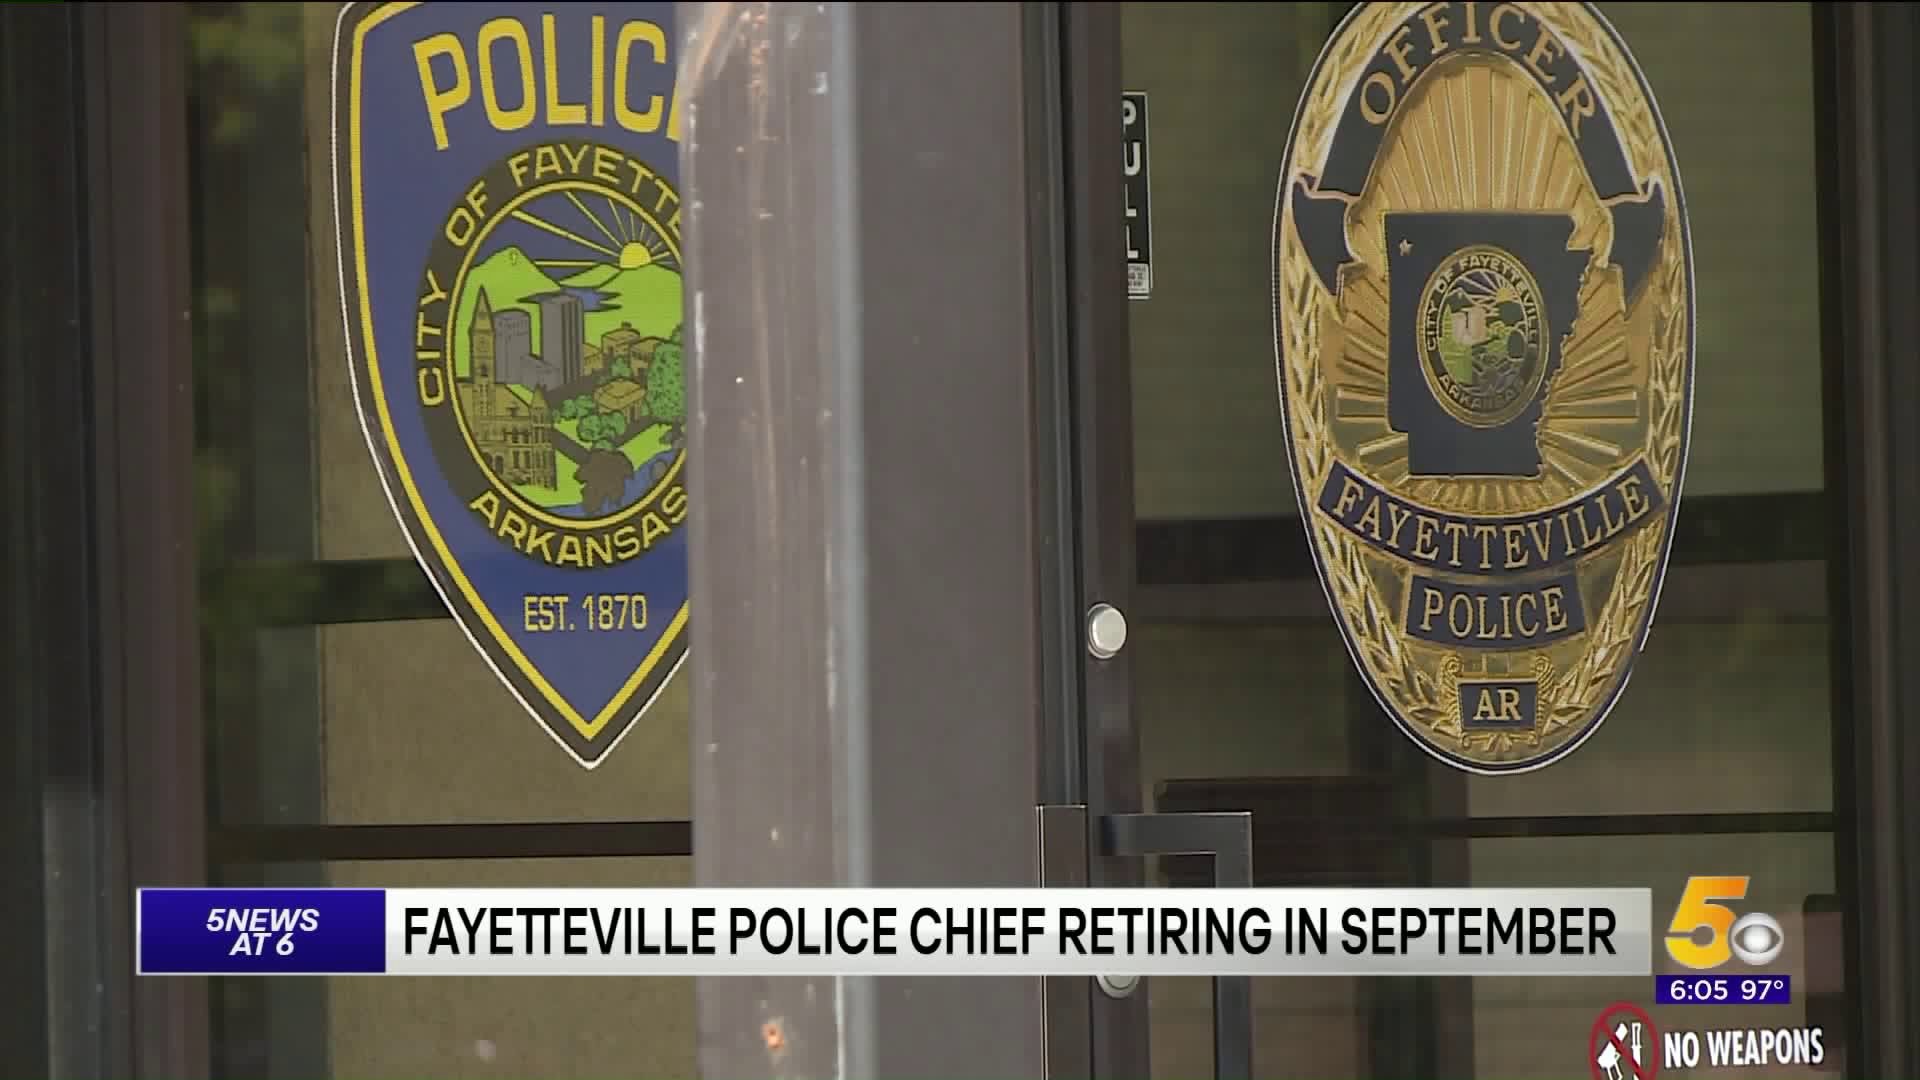 Fayetteville Police Chief Retiring